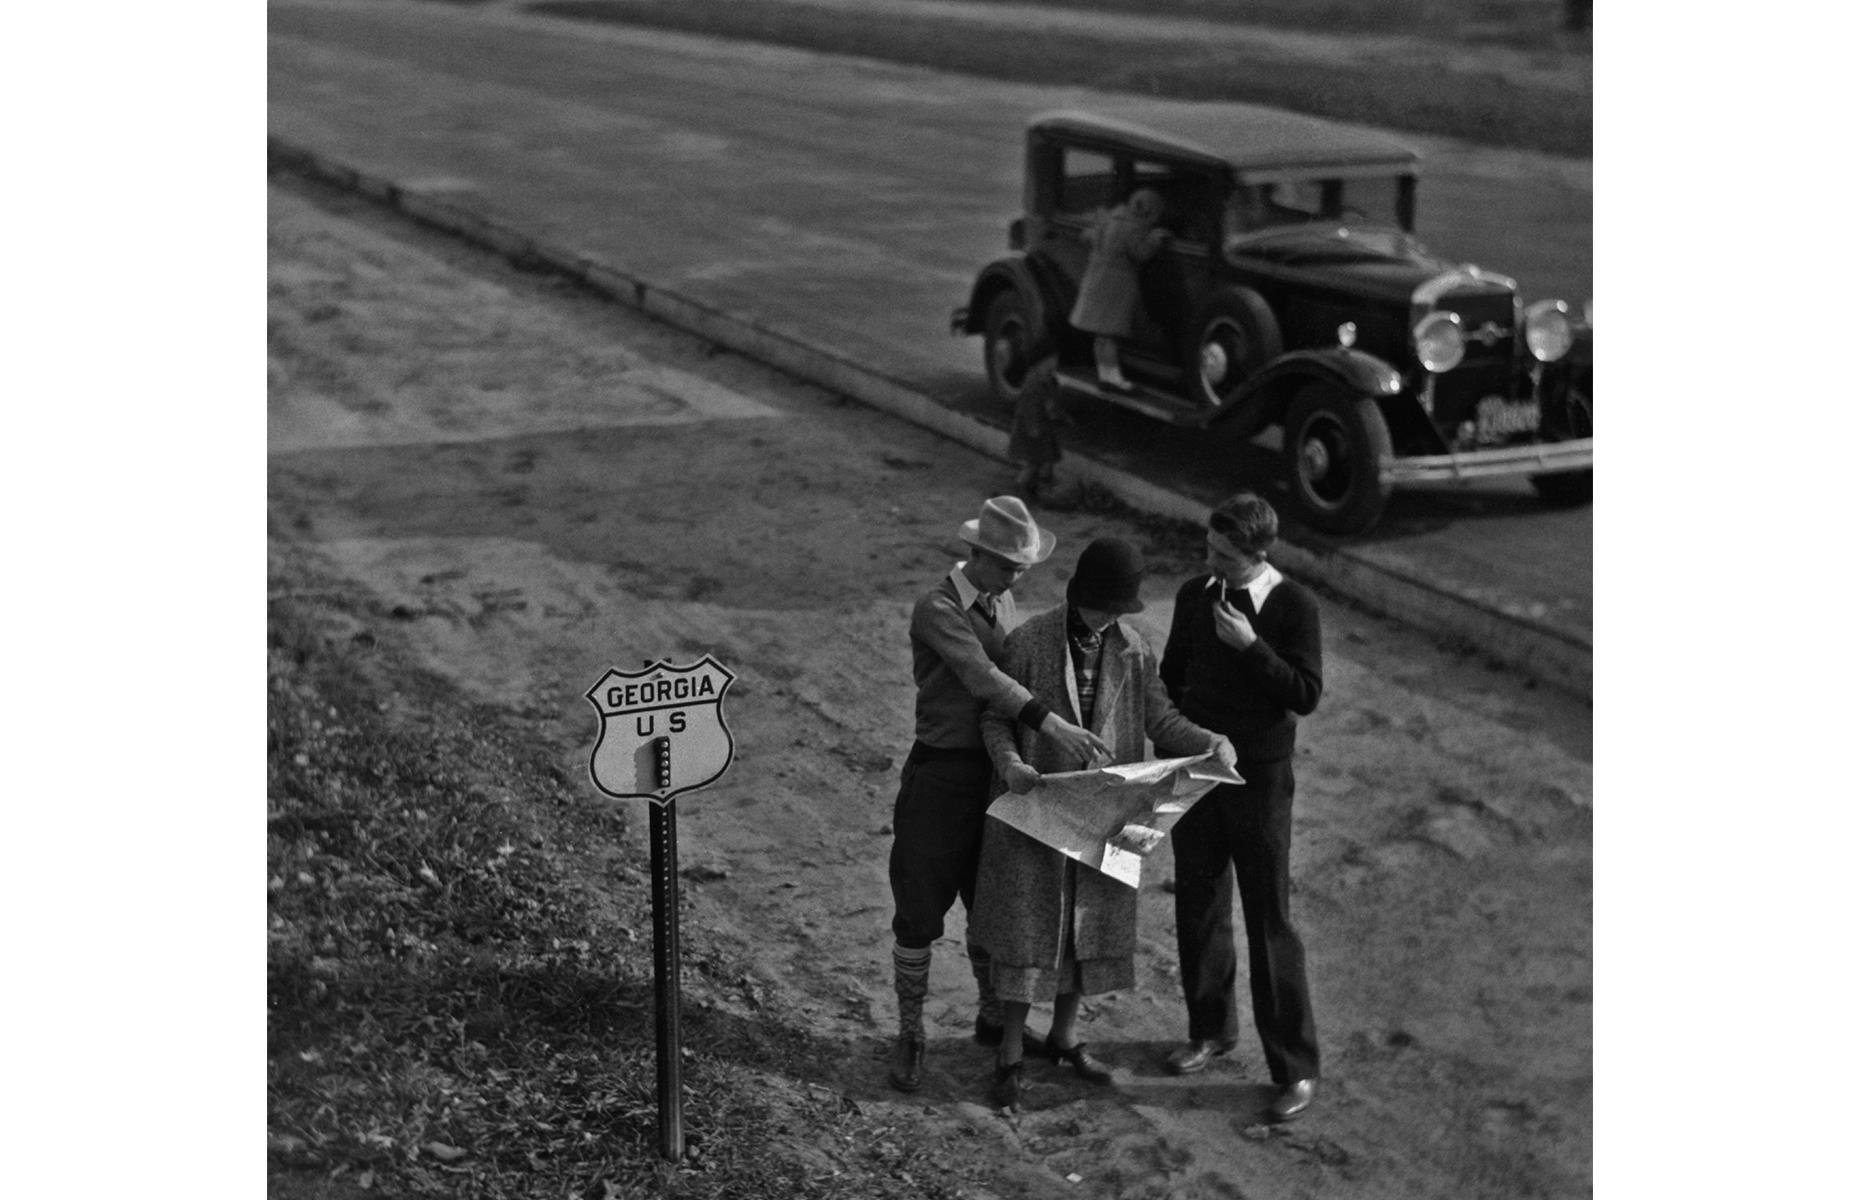 The Great Depression shook the automobile industry, and sales declined throughout this decade. However, those who could afford to still enjoyed the freedom of the open road, traveling to the coast, the mountains and beyond. Here, road trippers consult a map while passing through the state of Georgia.